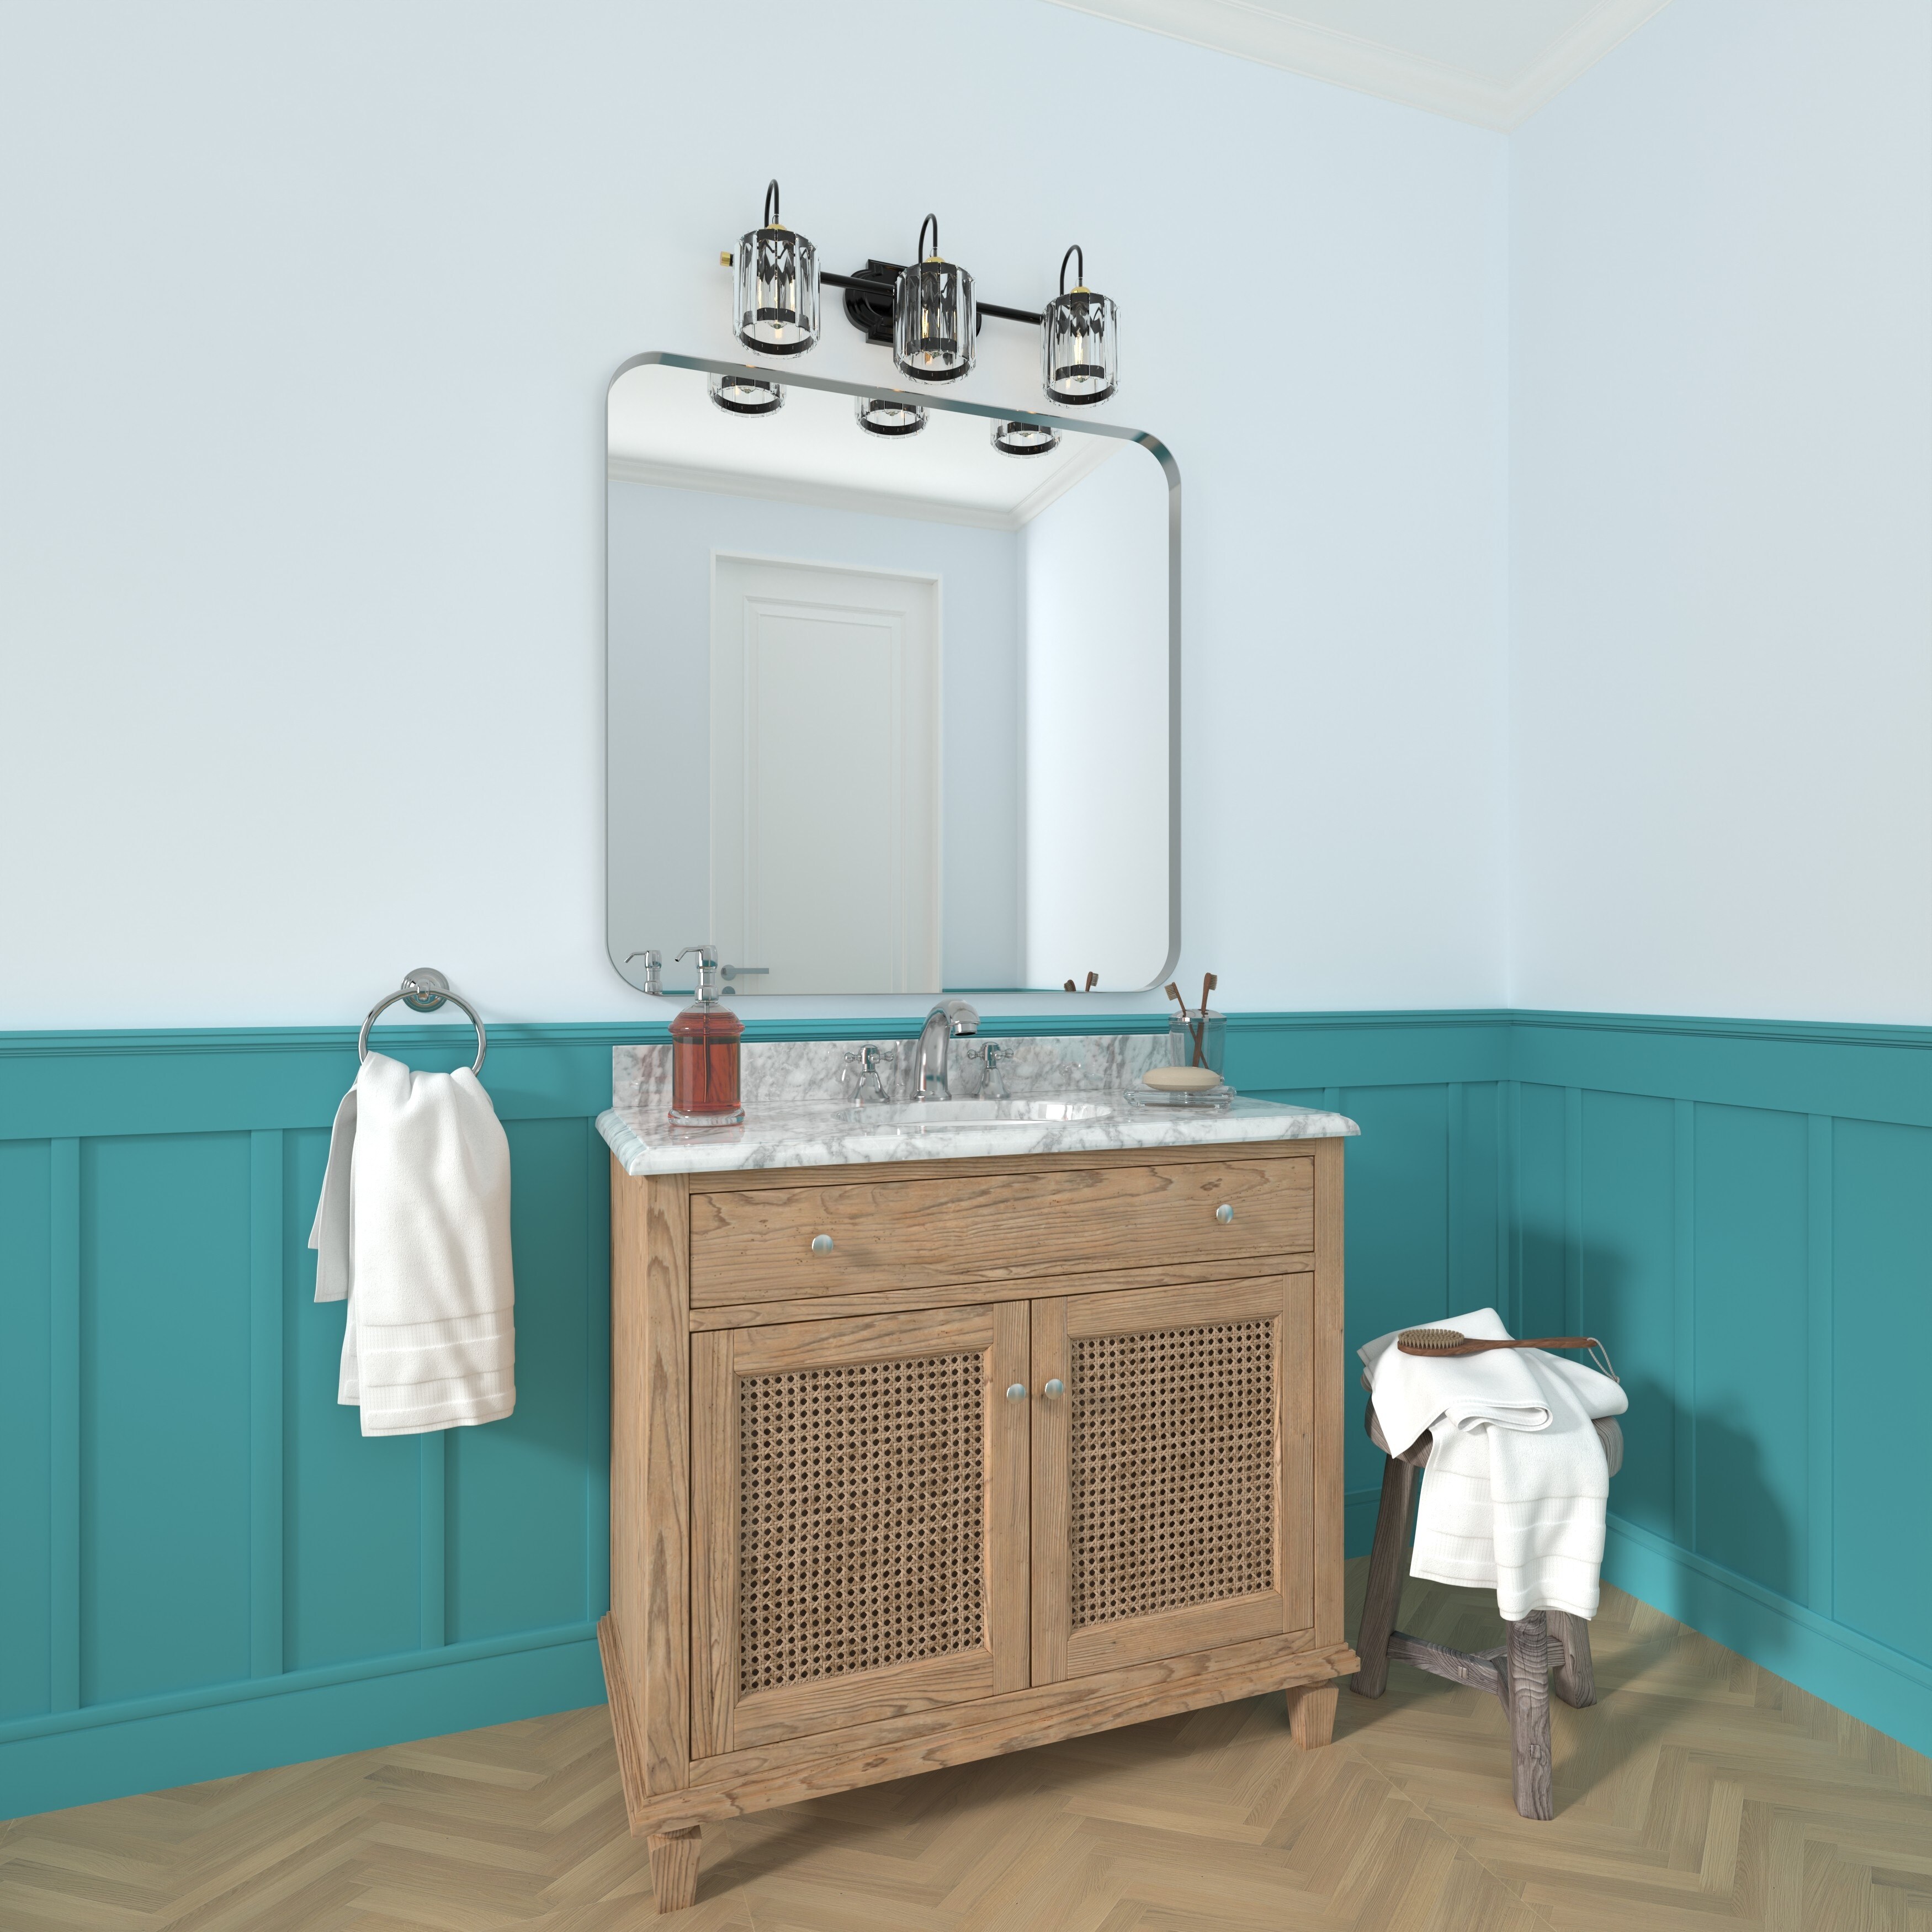 https://ak1.ostkcdn.com/images/products/is/images/direct/9f9766b71b09998acce5061f2114f6230f8ddf4b/TOOLKISS-Rectangular-Aluminum-Frame-Vanity-Mirror-with-Clear-Glass.jpg